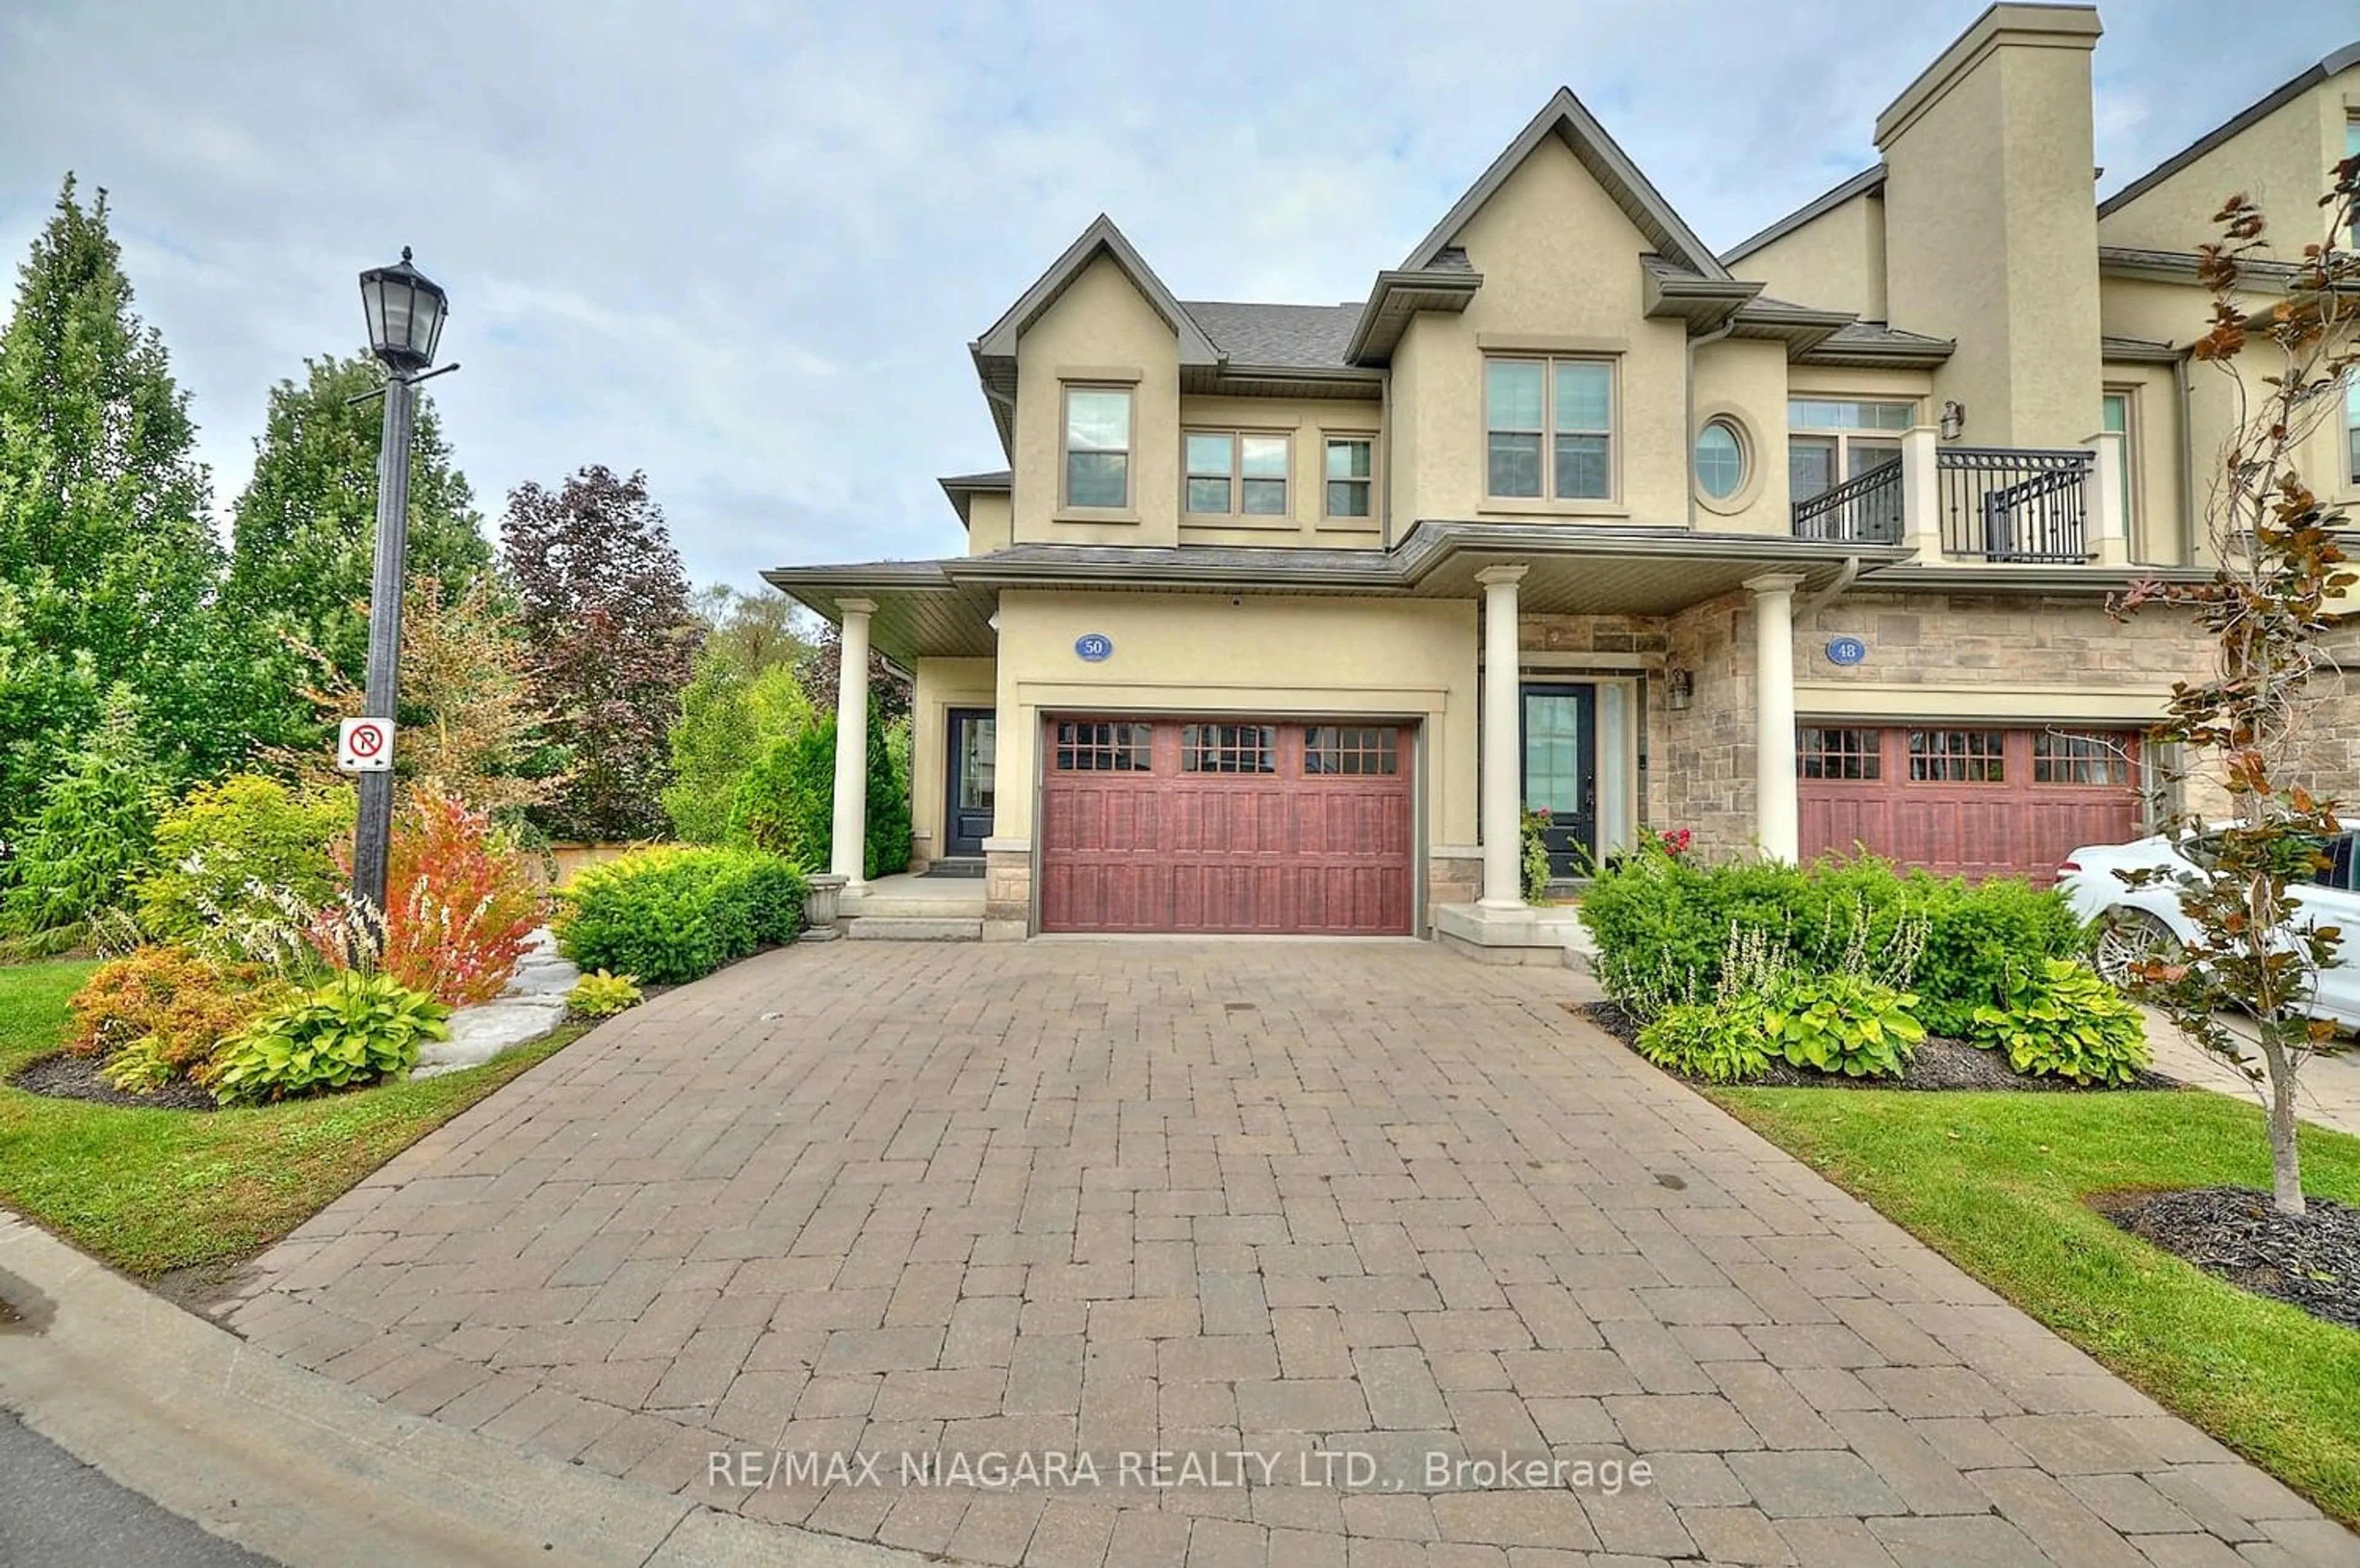 Home with brick exterior material for 50 Aberdeen Lane, Niagara-on-the-Lake Ontario L0S 1J0